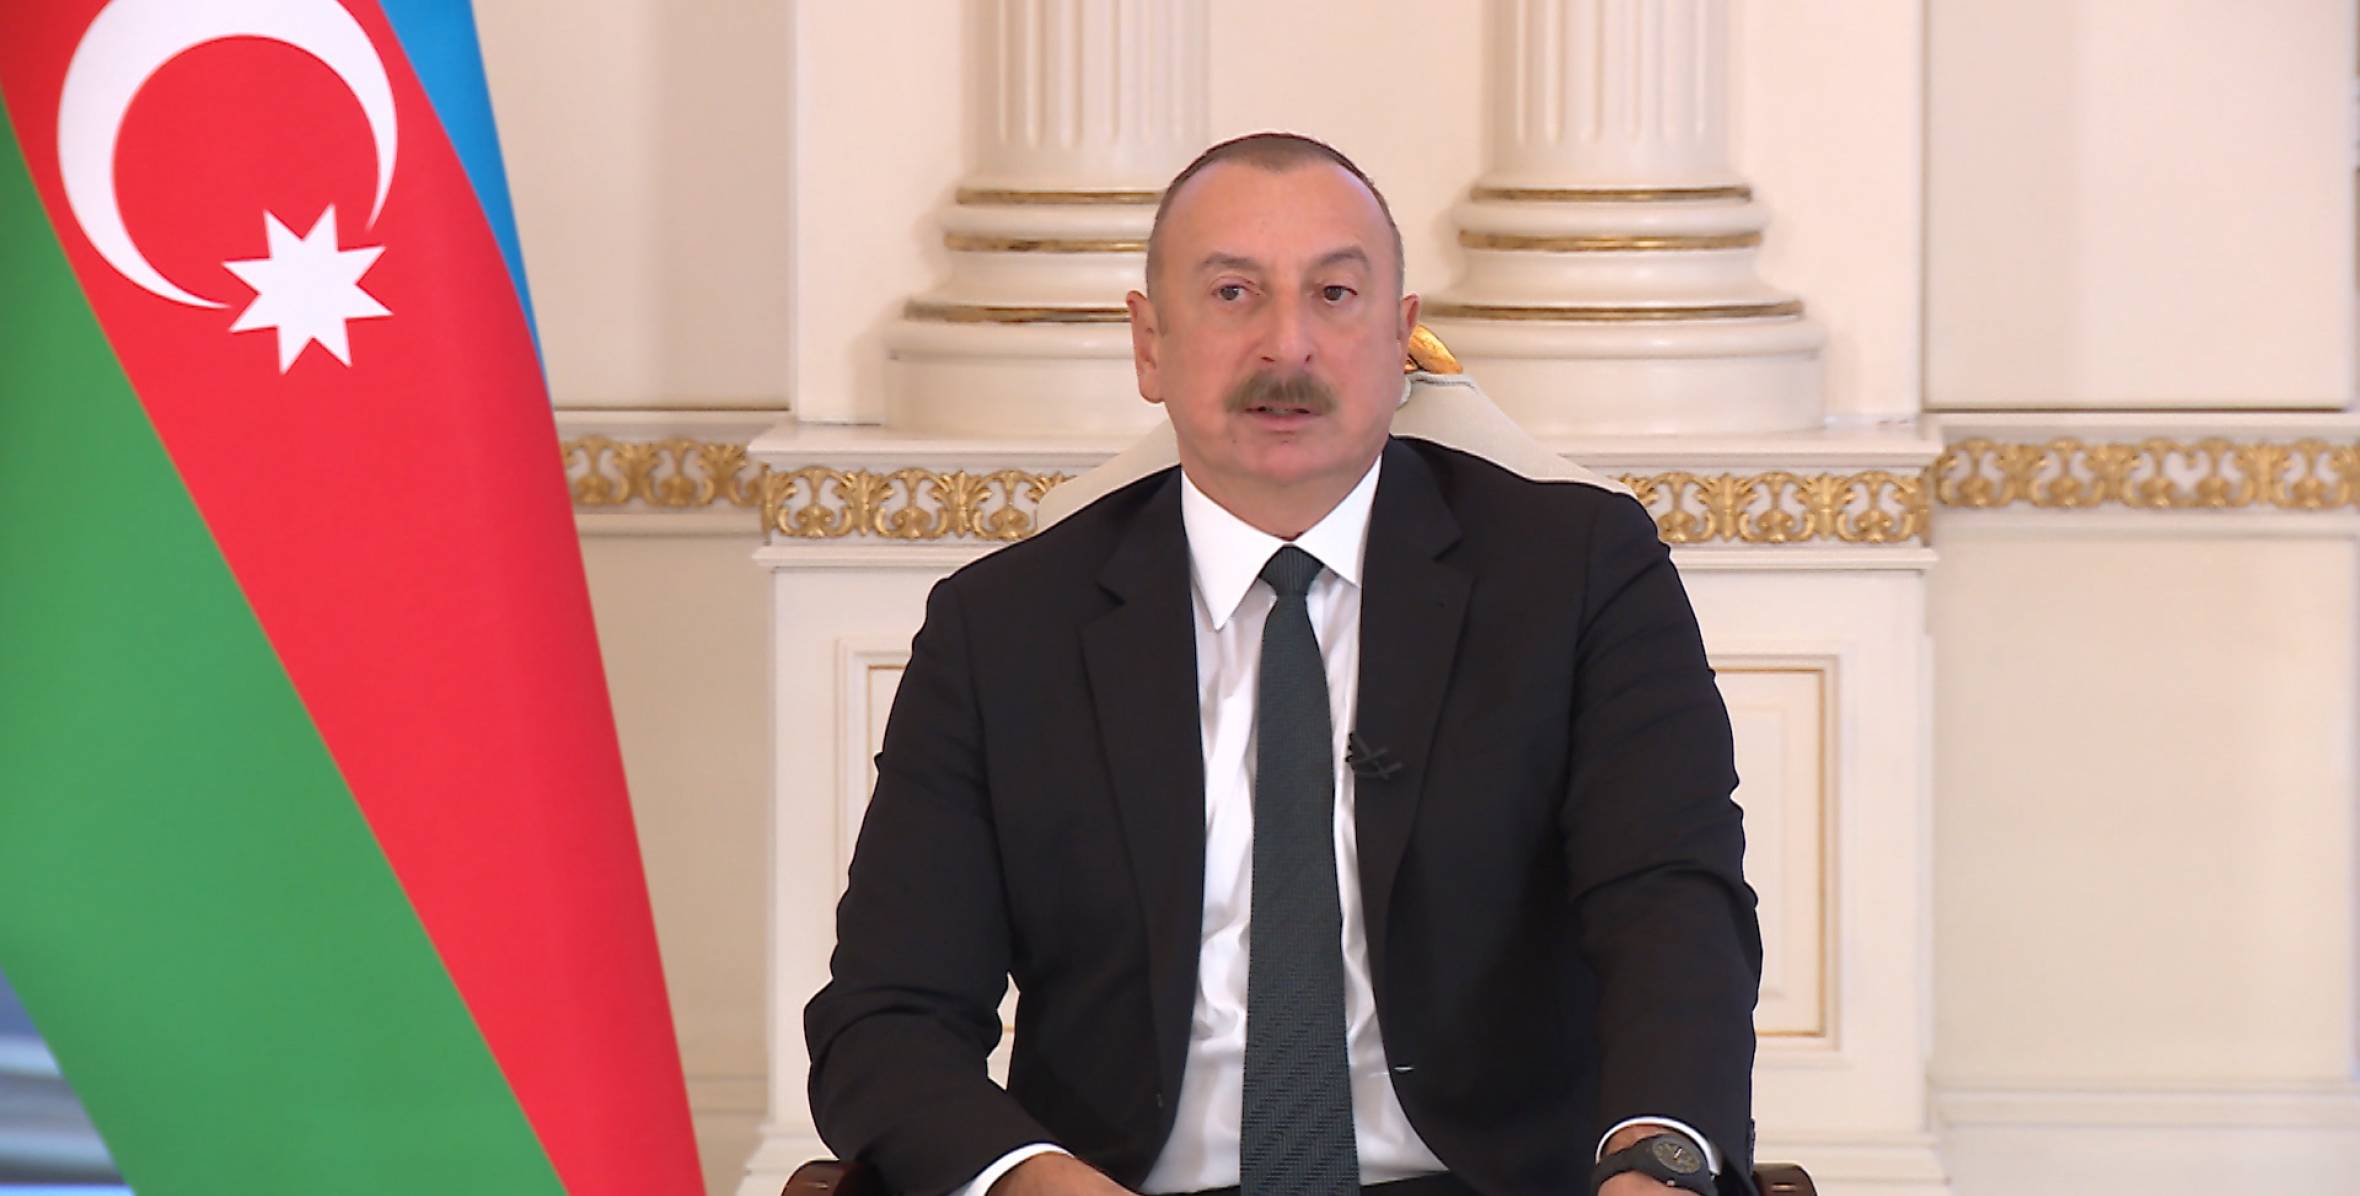 Ilham Aliyev was interviewed by local TV channels